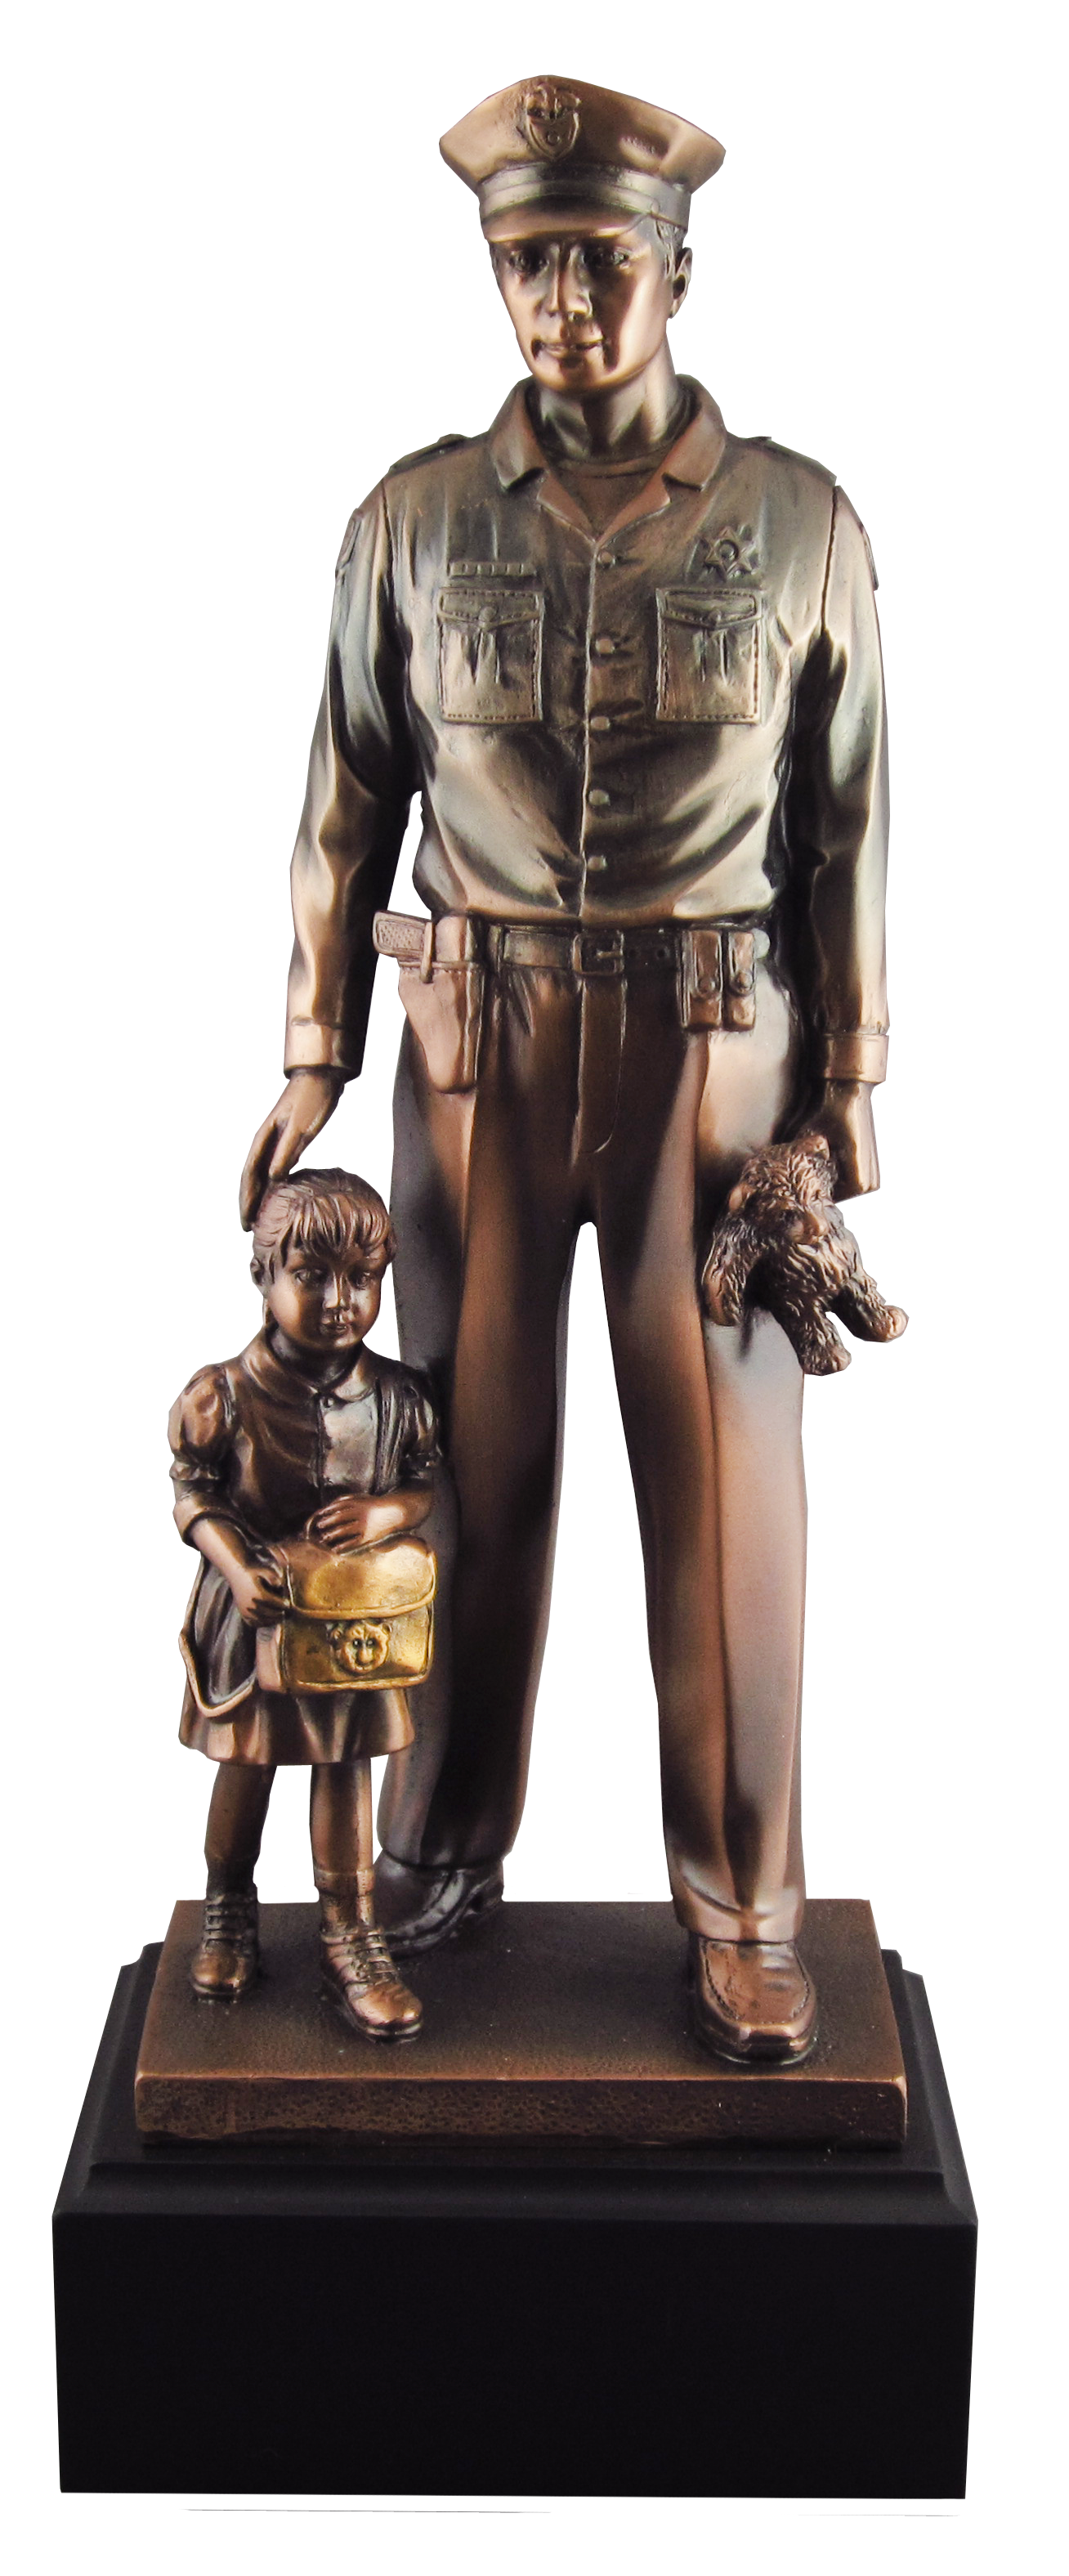 Policeman with Child Statue